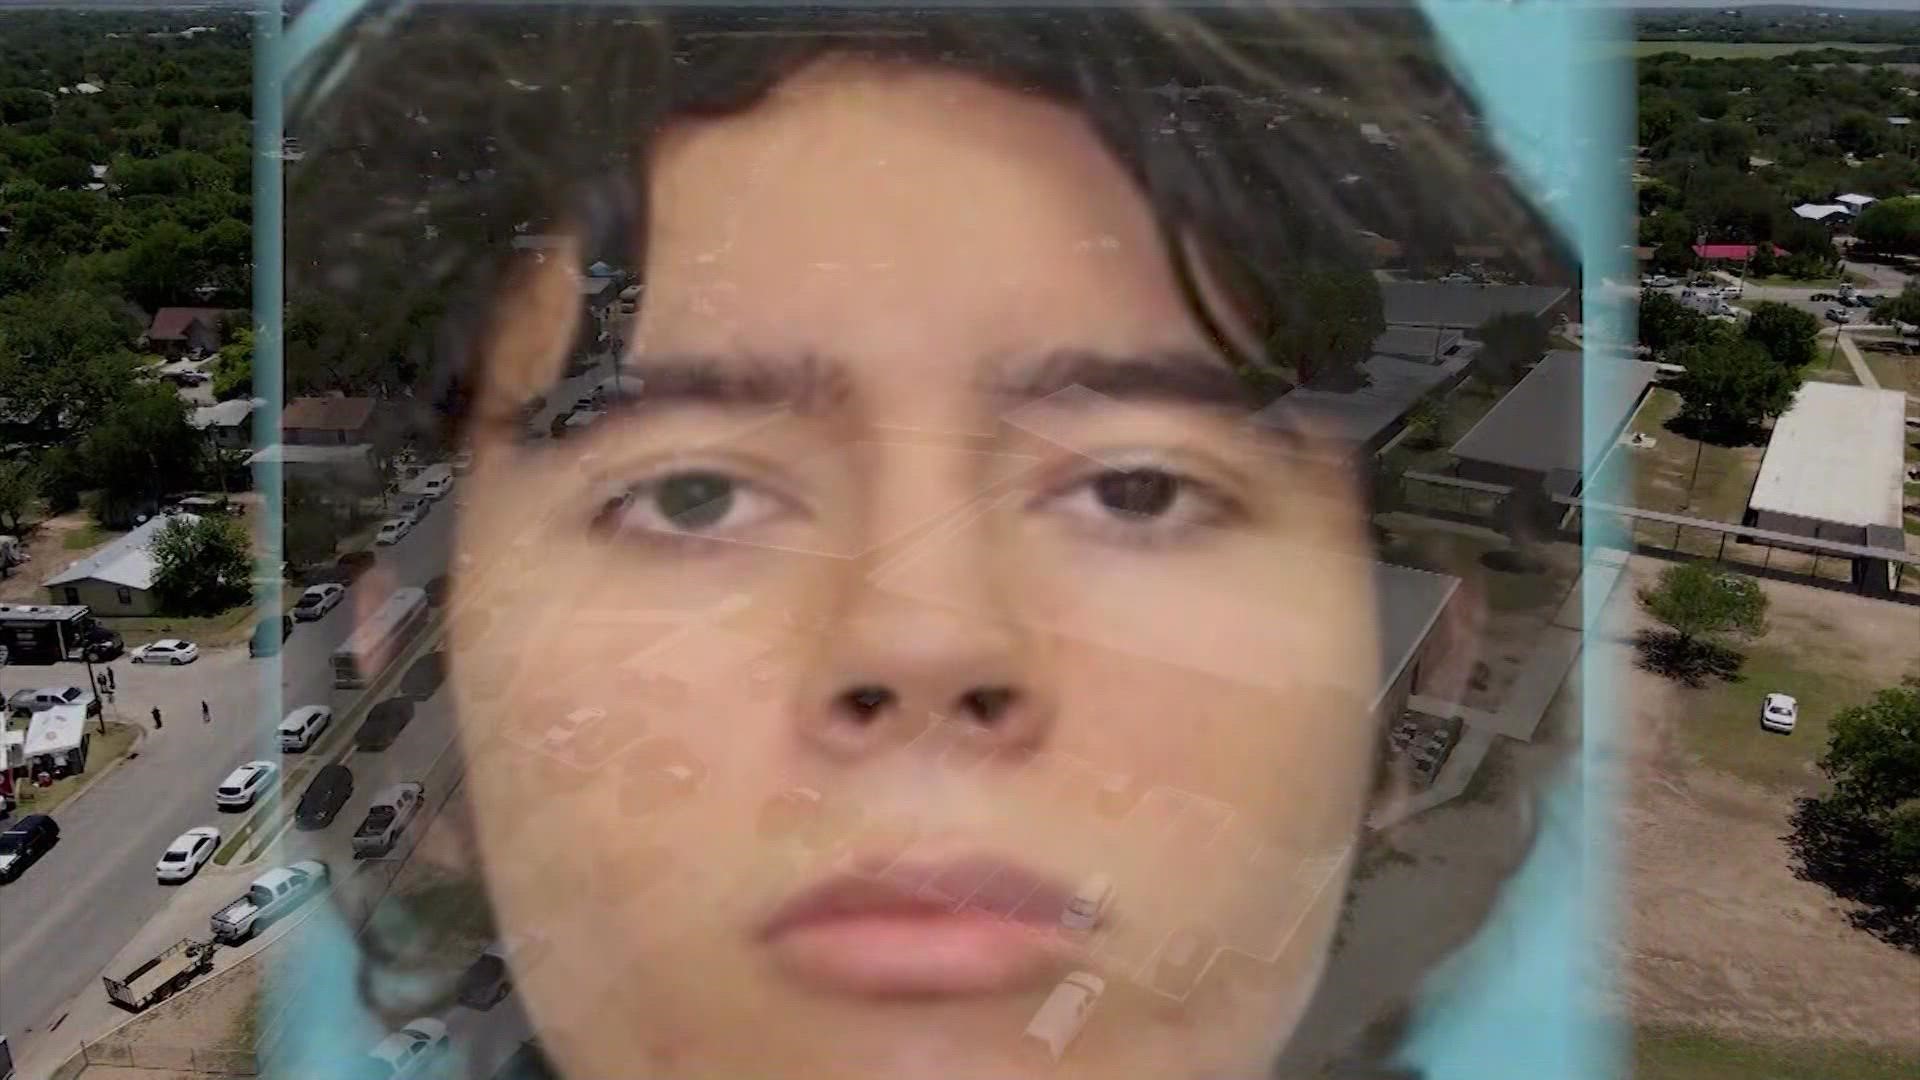 KHOU 11 Investigates is learning new information about the enormous amount of firepower the alleged school shooter had during the mass shooting in Uvalde last week.